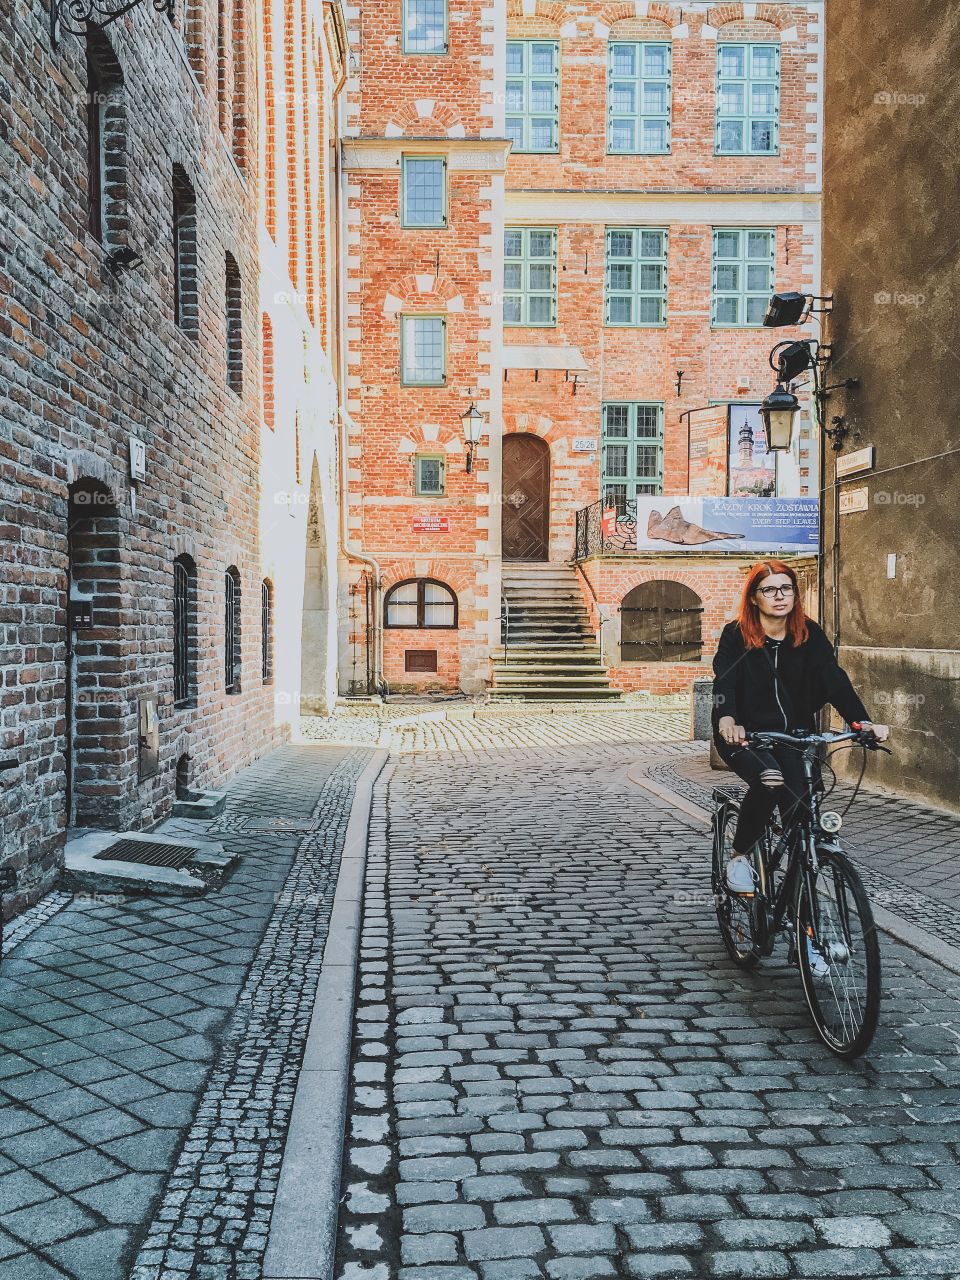 Woman riding bicycle in alley